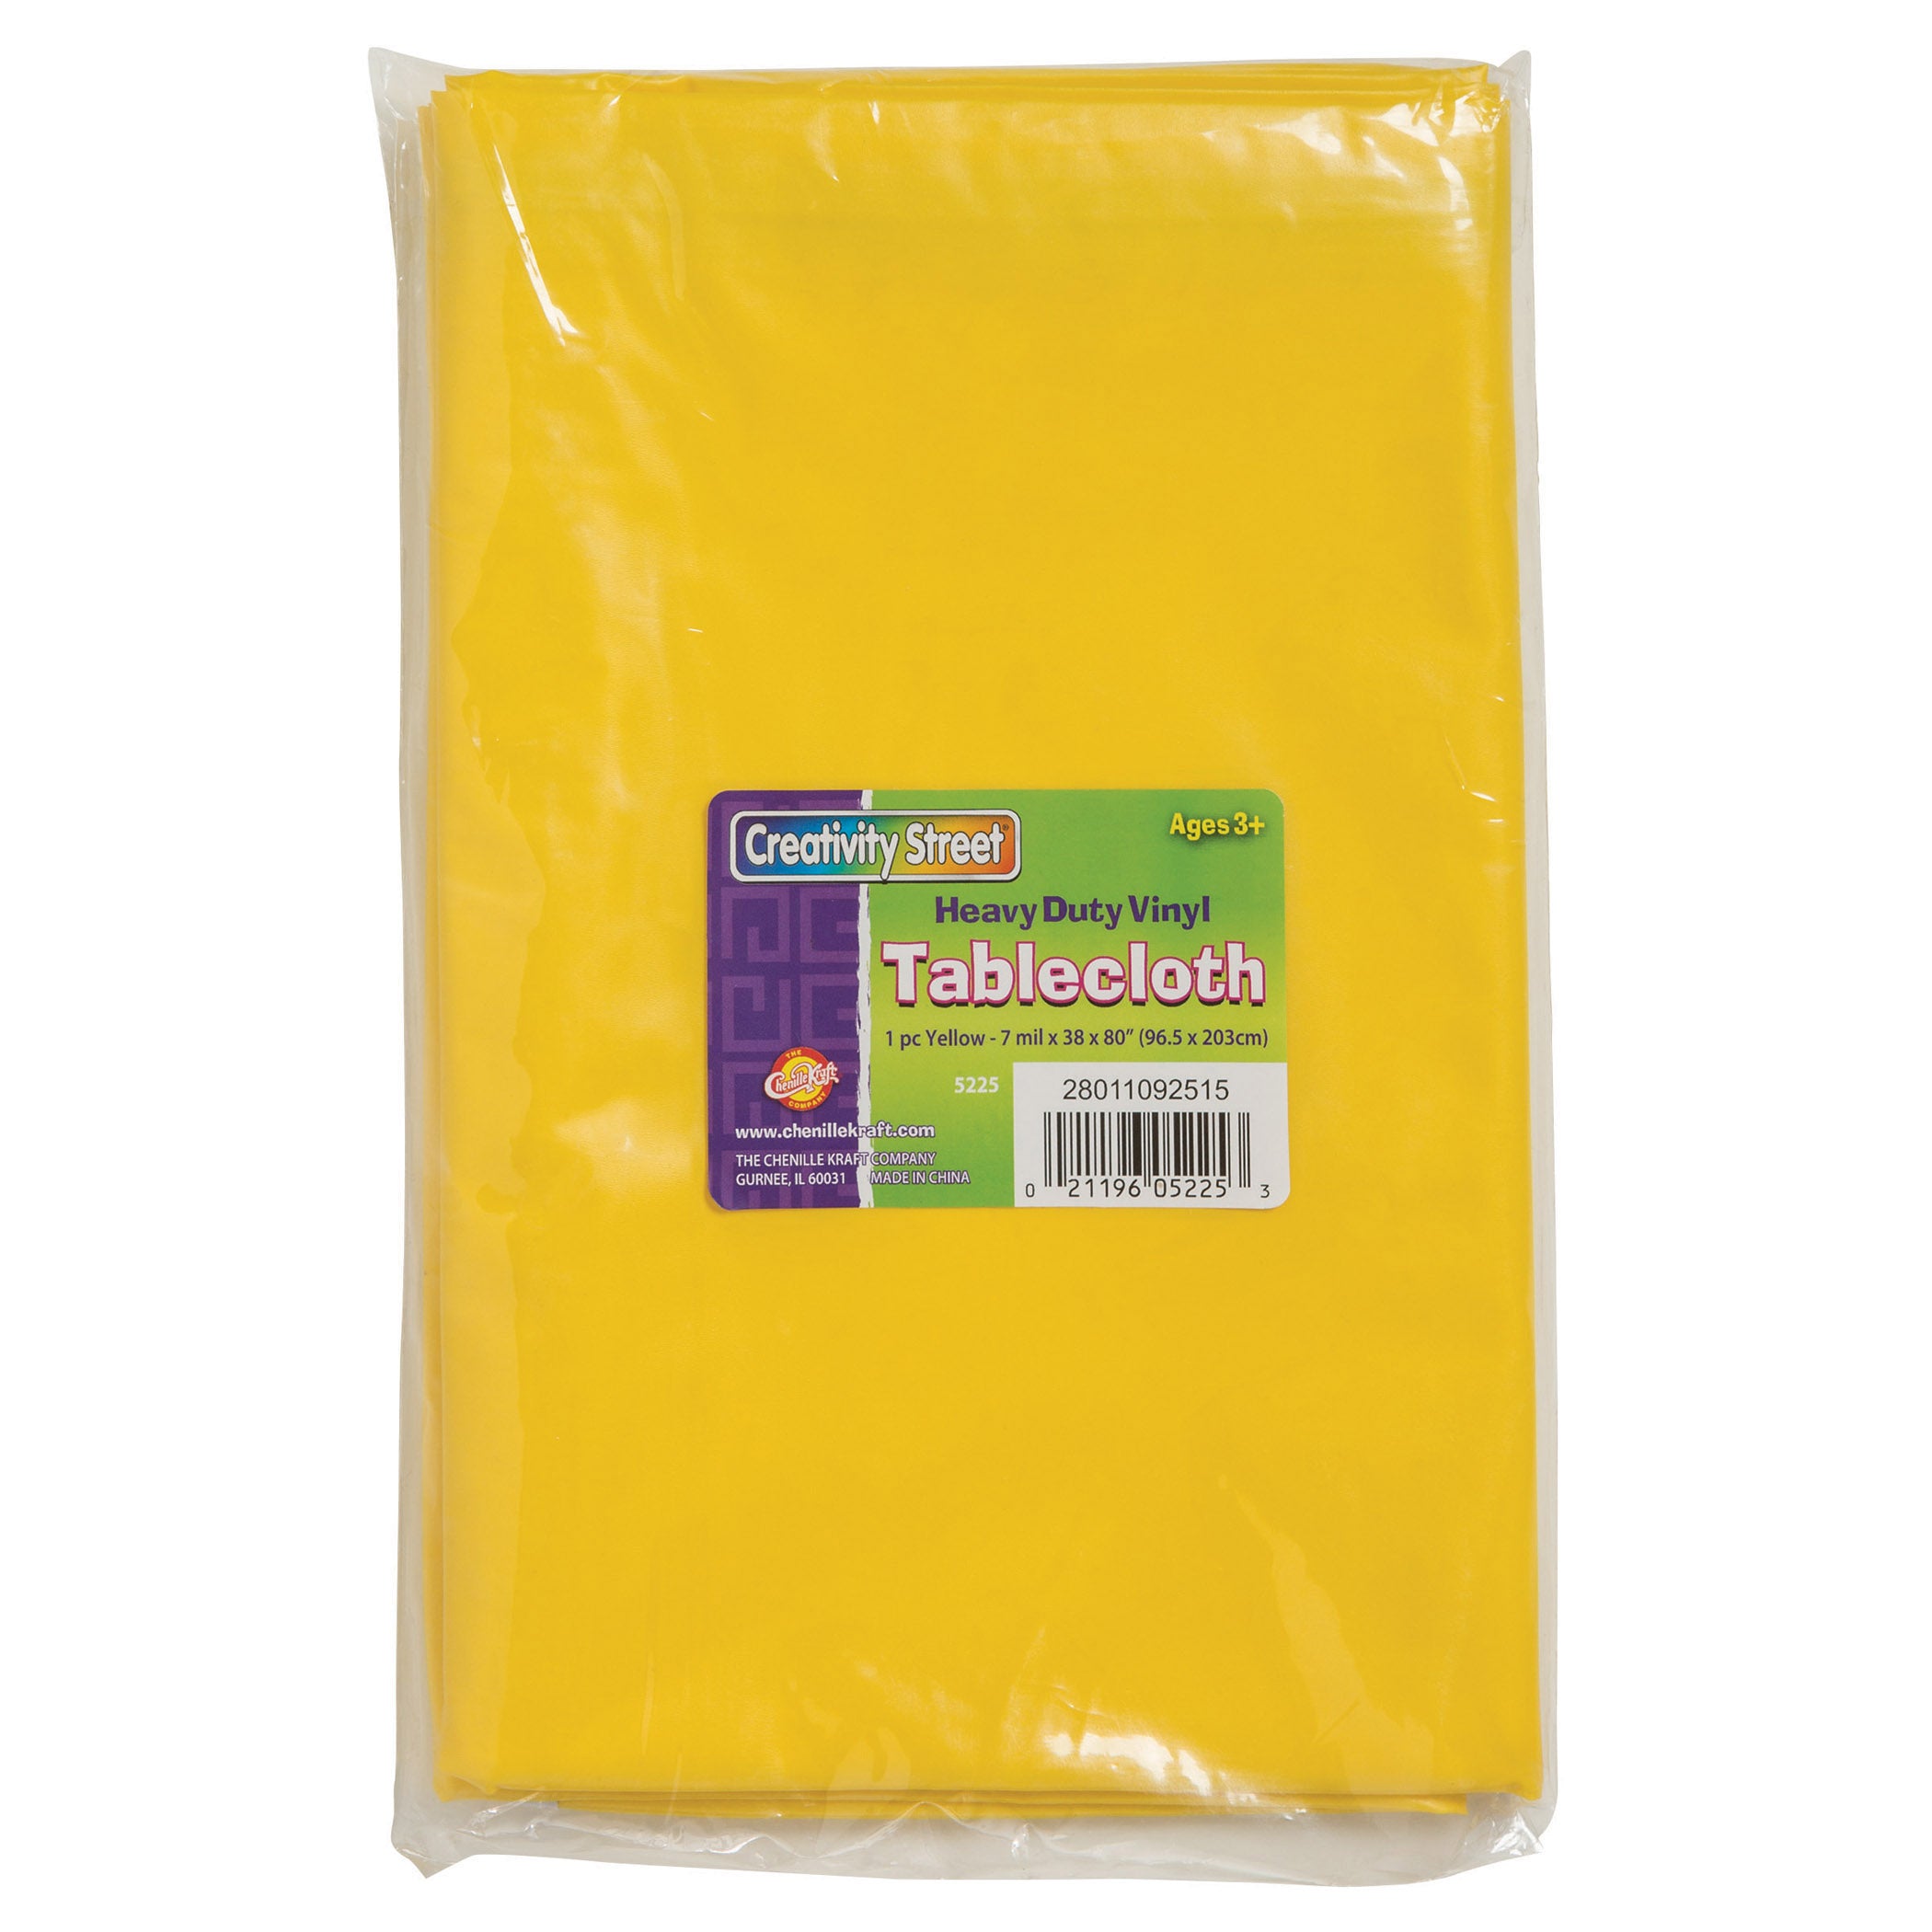 Vinyl Tablecloth, Yellow, 38" x 80", Pack of 3